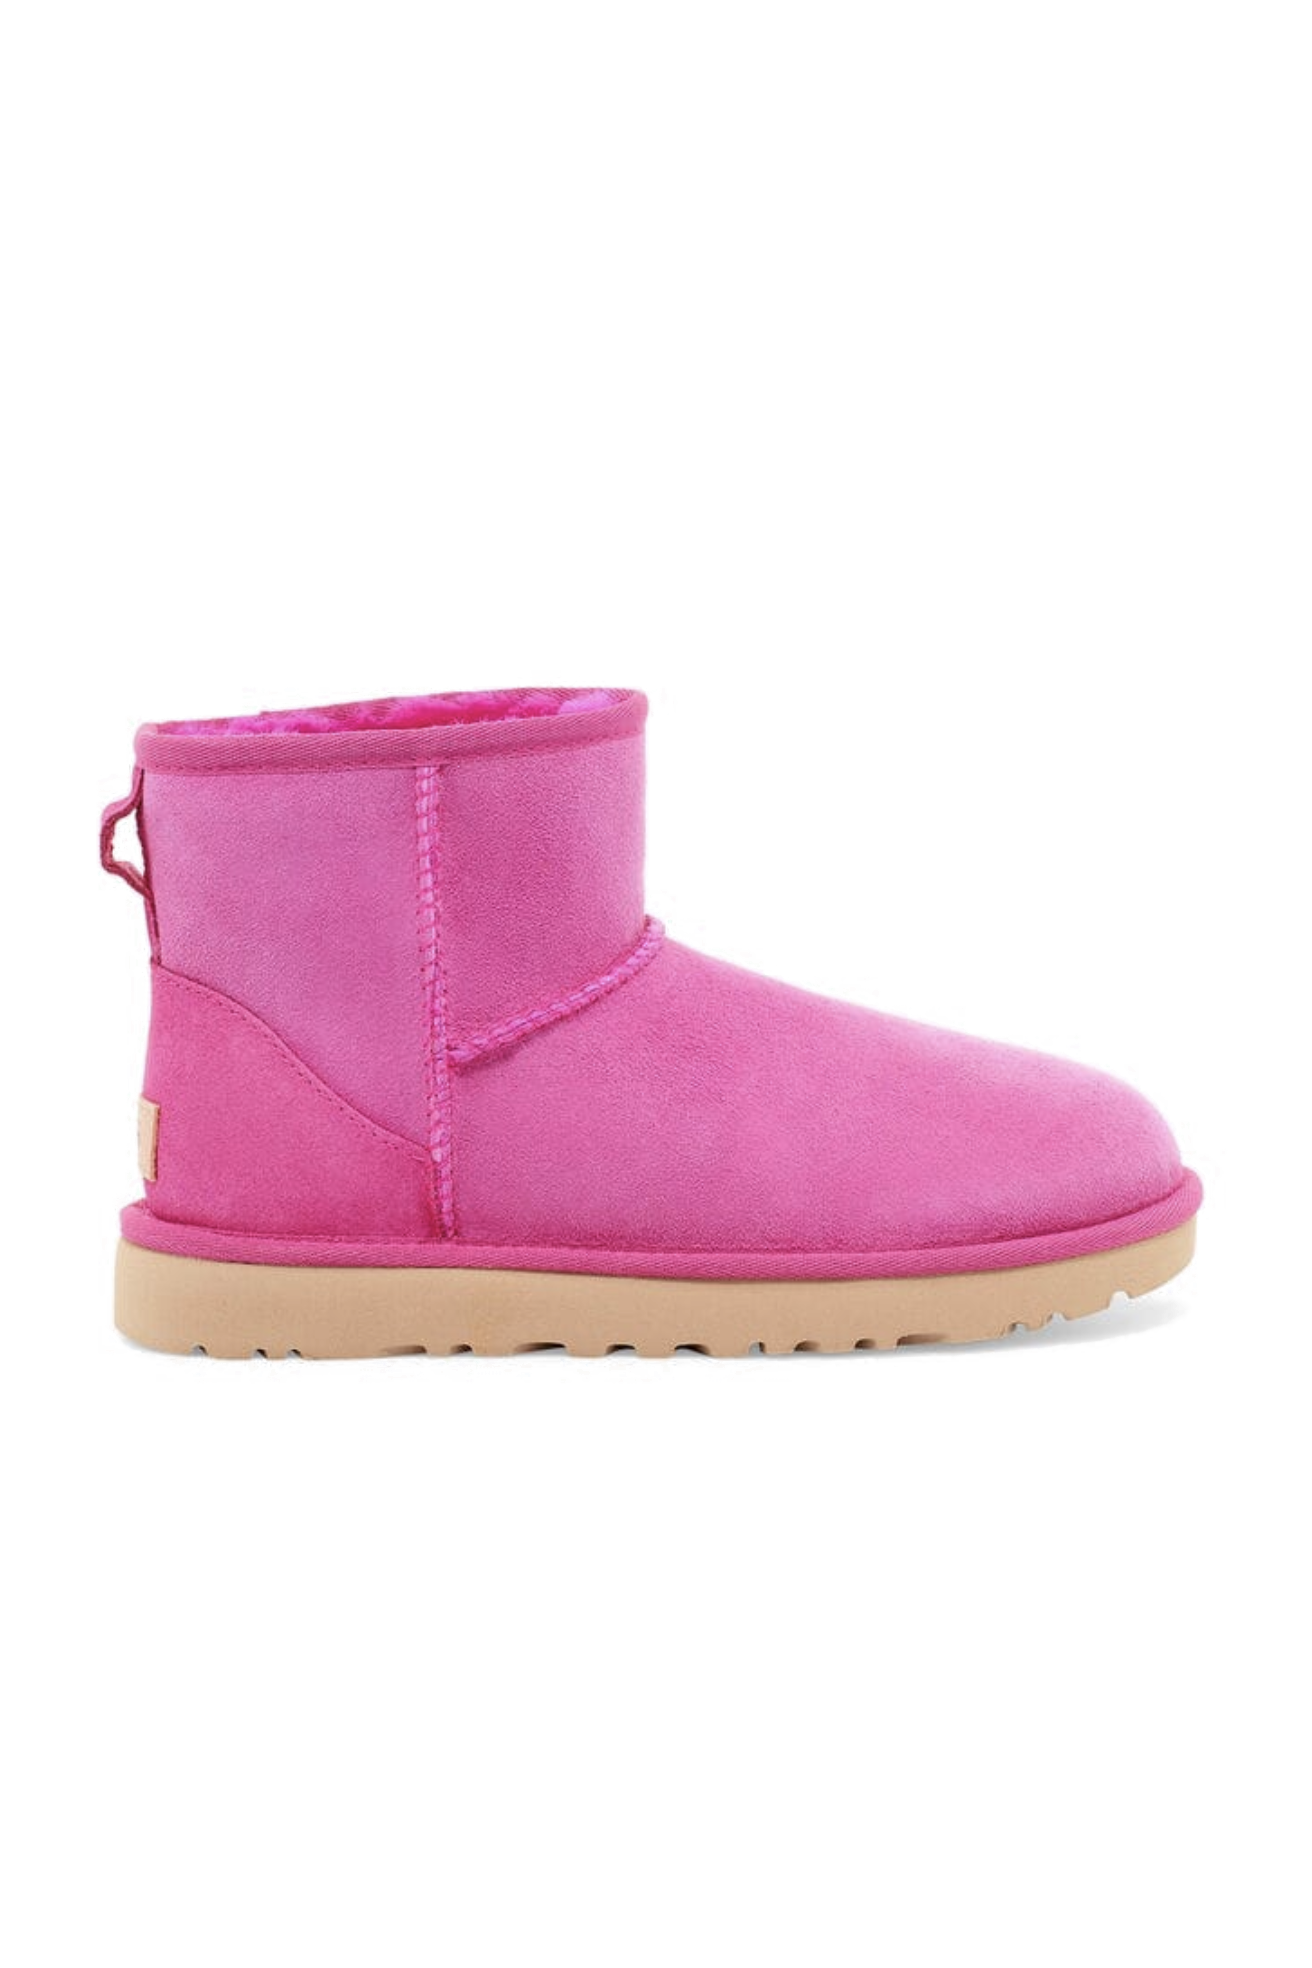 hot pink ugg boots